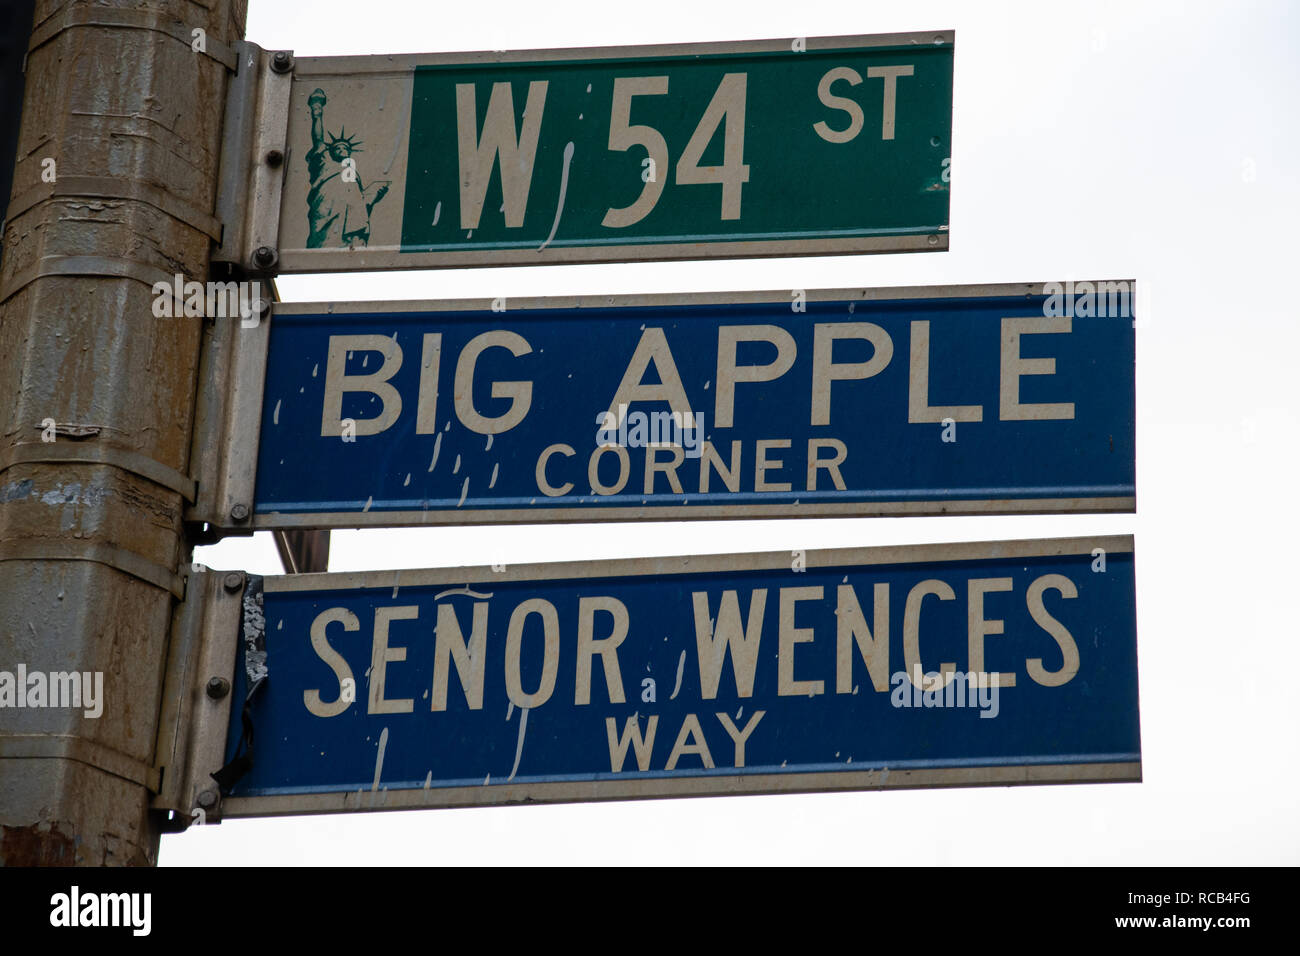 New York City, United States - November 17 2018:   Road signs for West 54th, Big Apple Corner and Senor Wences Way hang from a lamppost on Boradway an Stock Photo